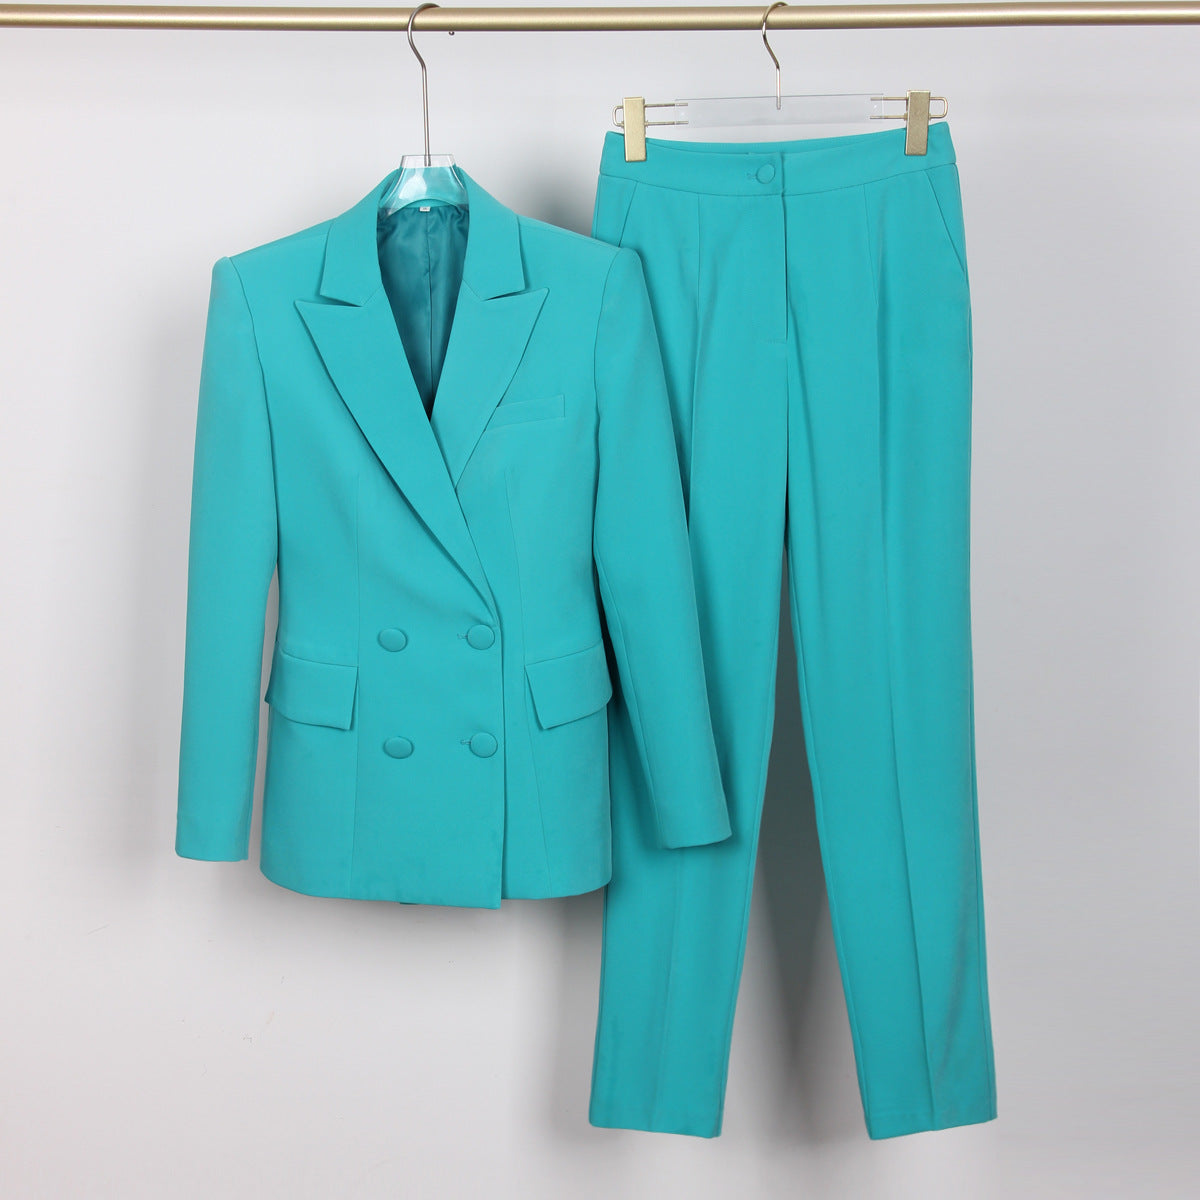 Double Breasted Mint Pant Suits for Women Plus Size Women Suits